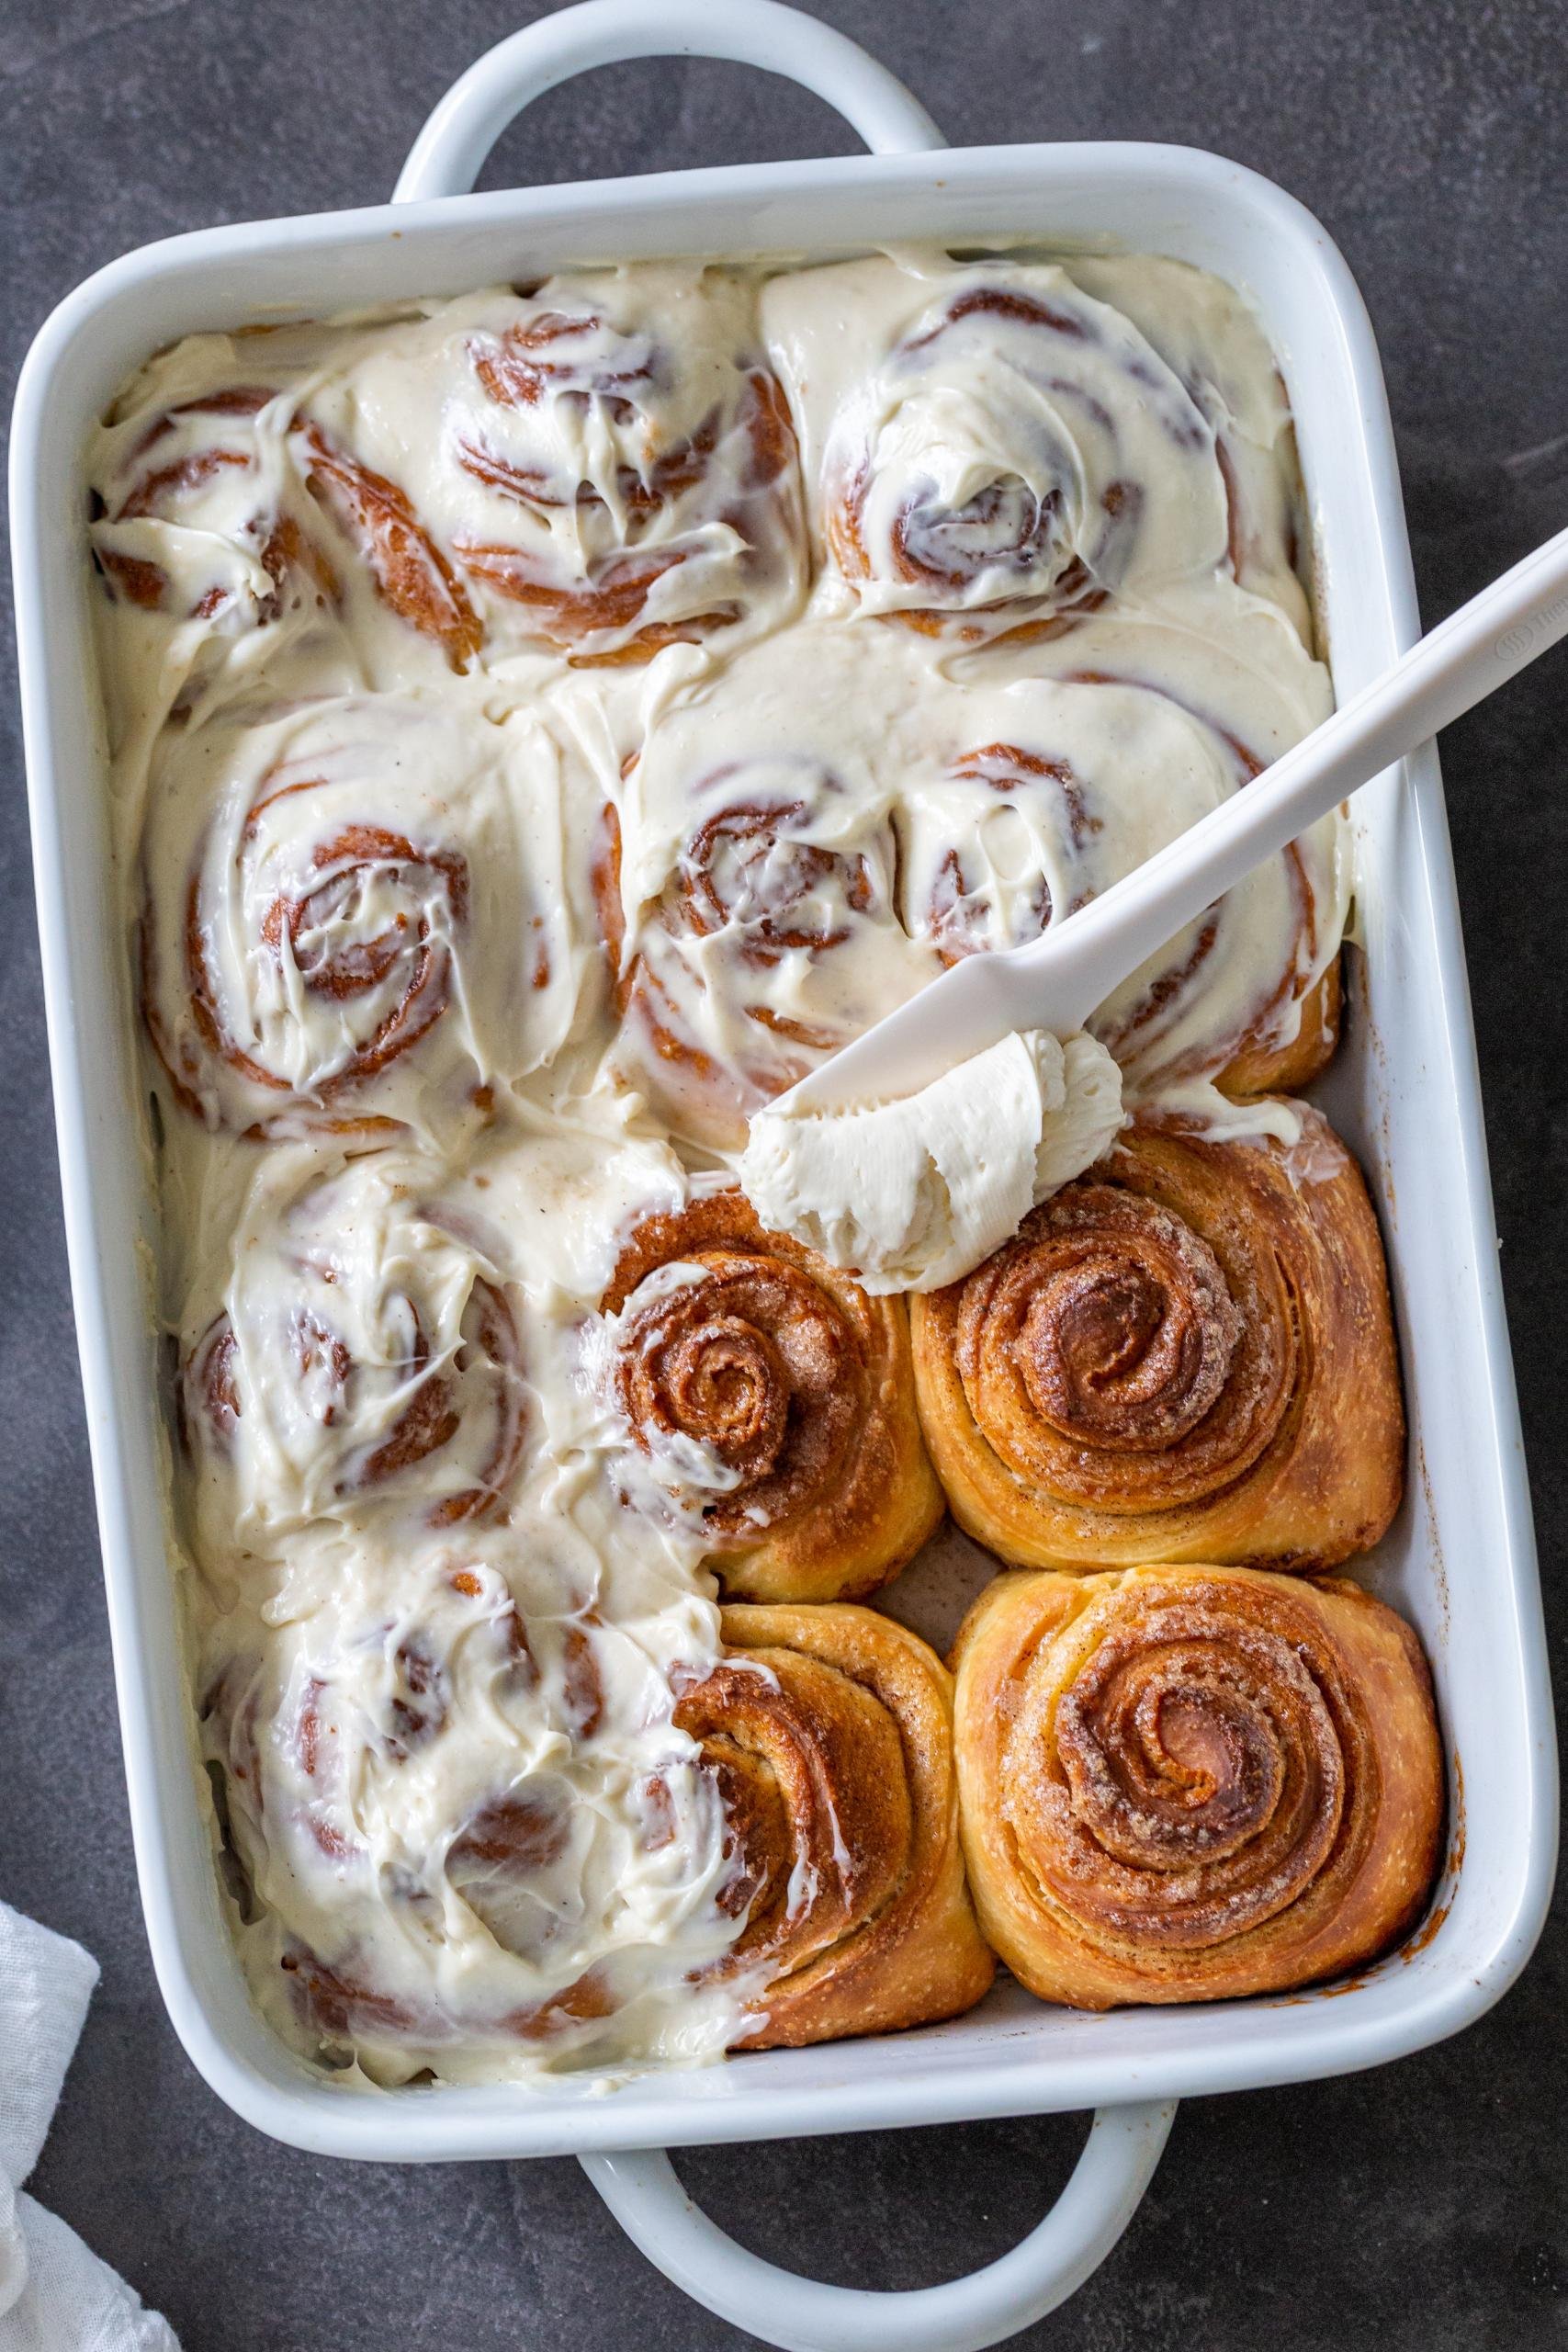 Cinnamon Bun with Chocolate Whipped Topper